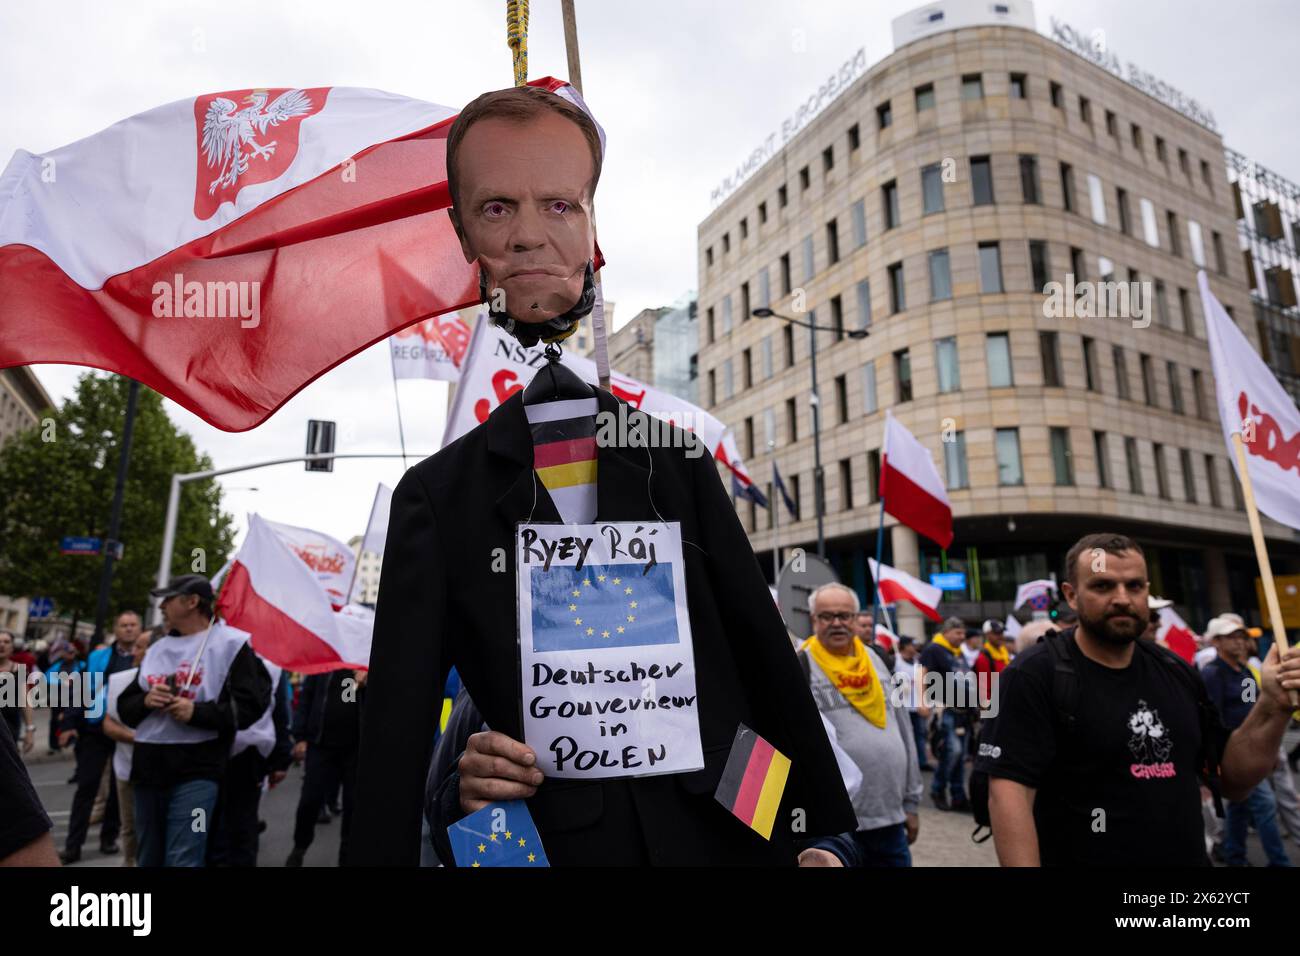 May 10, 2024, Warsaw, Mazovian Province, Poland: An effigy on a gallows representing the image of the Prime Minister of Poland, Donald TUsk, with the European Union flag and the German flag attached, as well as an epithet insulting Donald Tusk and the slongan ''German governor in Poland'' is seen during a protest against the European Union's Green Deal ahead of EU parliamentary elections, in Warsaw. The protest was organized by the Independent Self-Governing Trade Union ''Solidarity'', farmers, right-wing and anti-EU movements with the participation of Law and Justice and Confederation politic Stock Photo